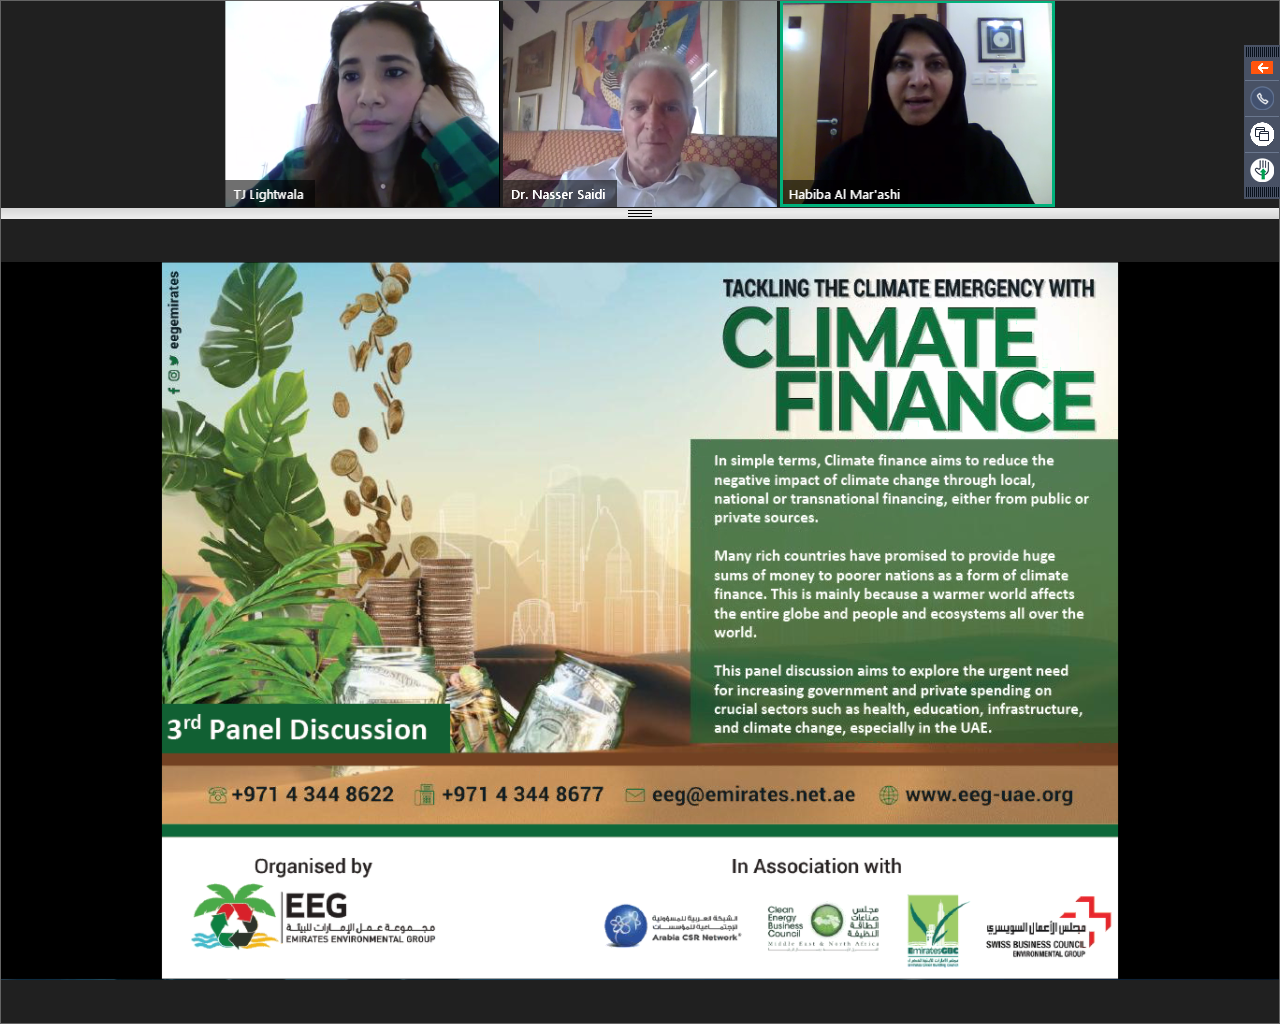 Image for Emirates Environmental Group Hosts 3rd Panel Discussion On Climate Finance In The UAE